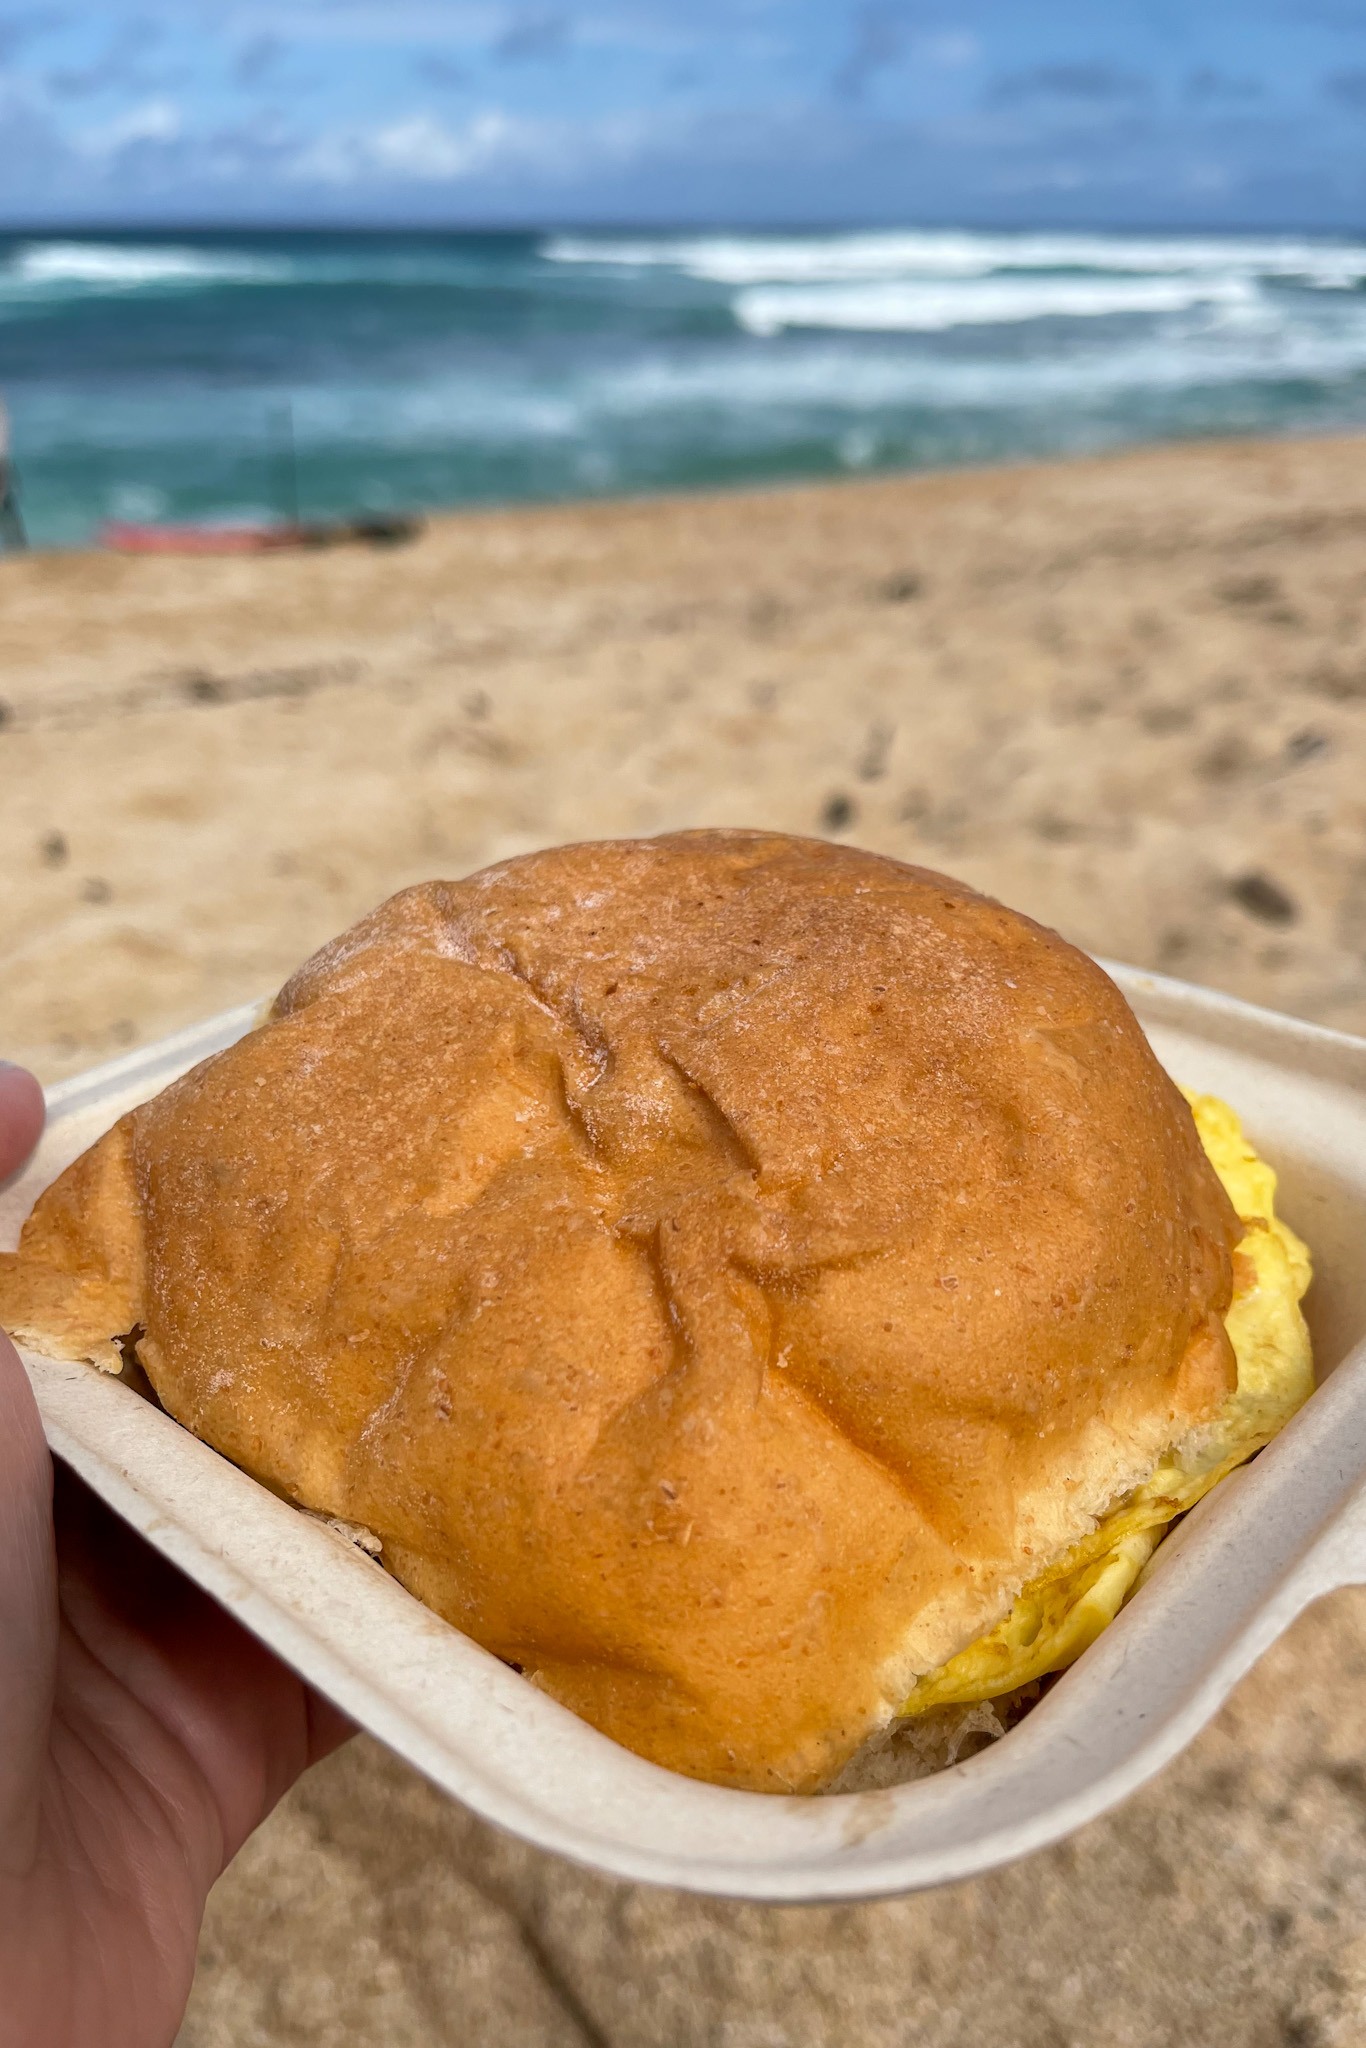 Ted's Bakery Egg and Cheese breakfast sandwich at Sunset Beach on North Shore Oahu